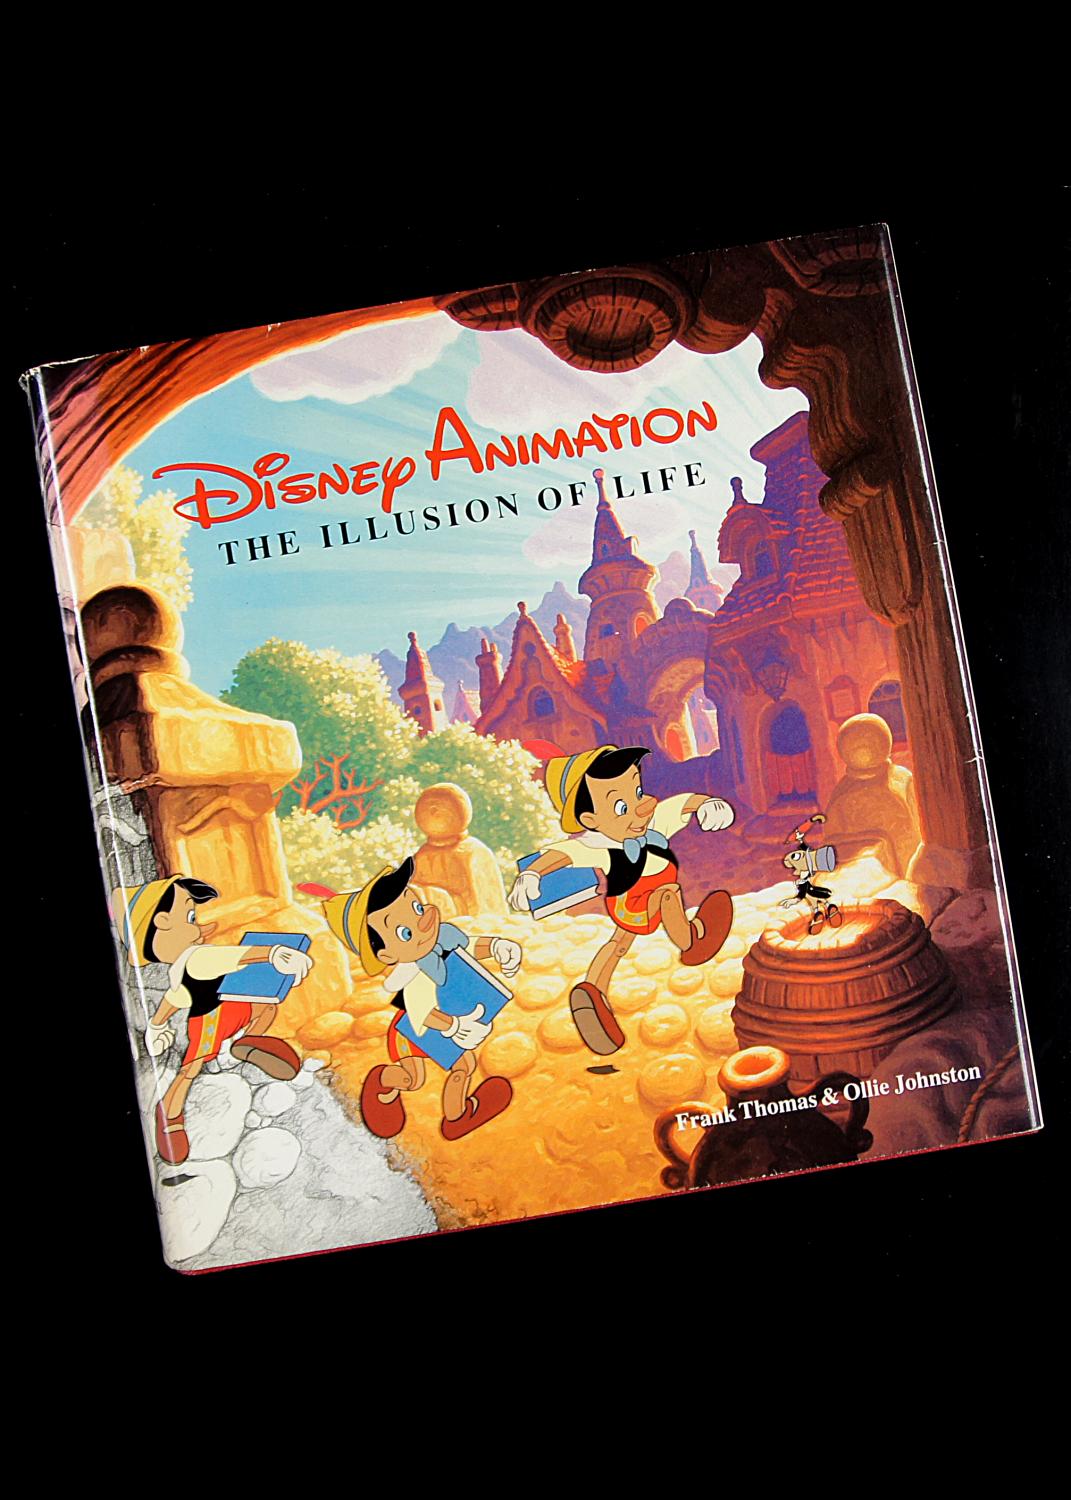 Disney Animation - the Illusion of Life by Frank Thomas and Ollie 